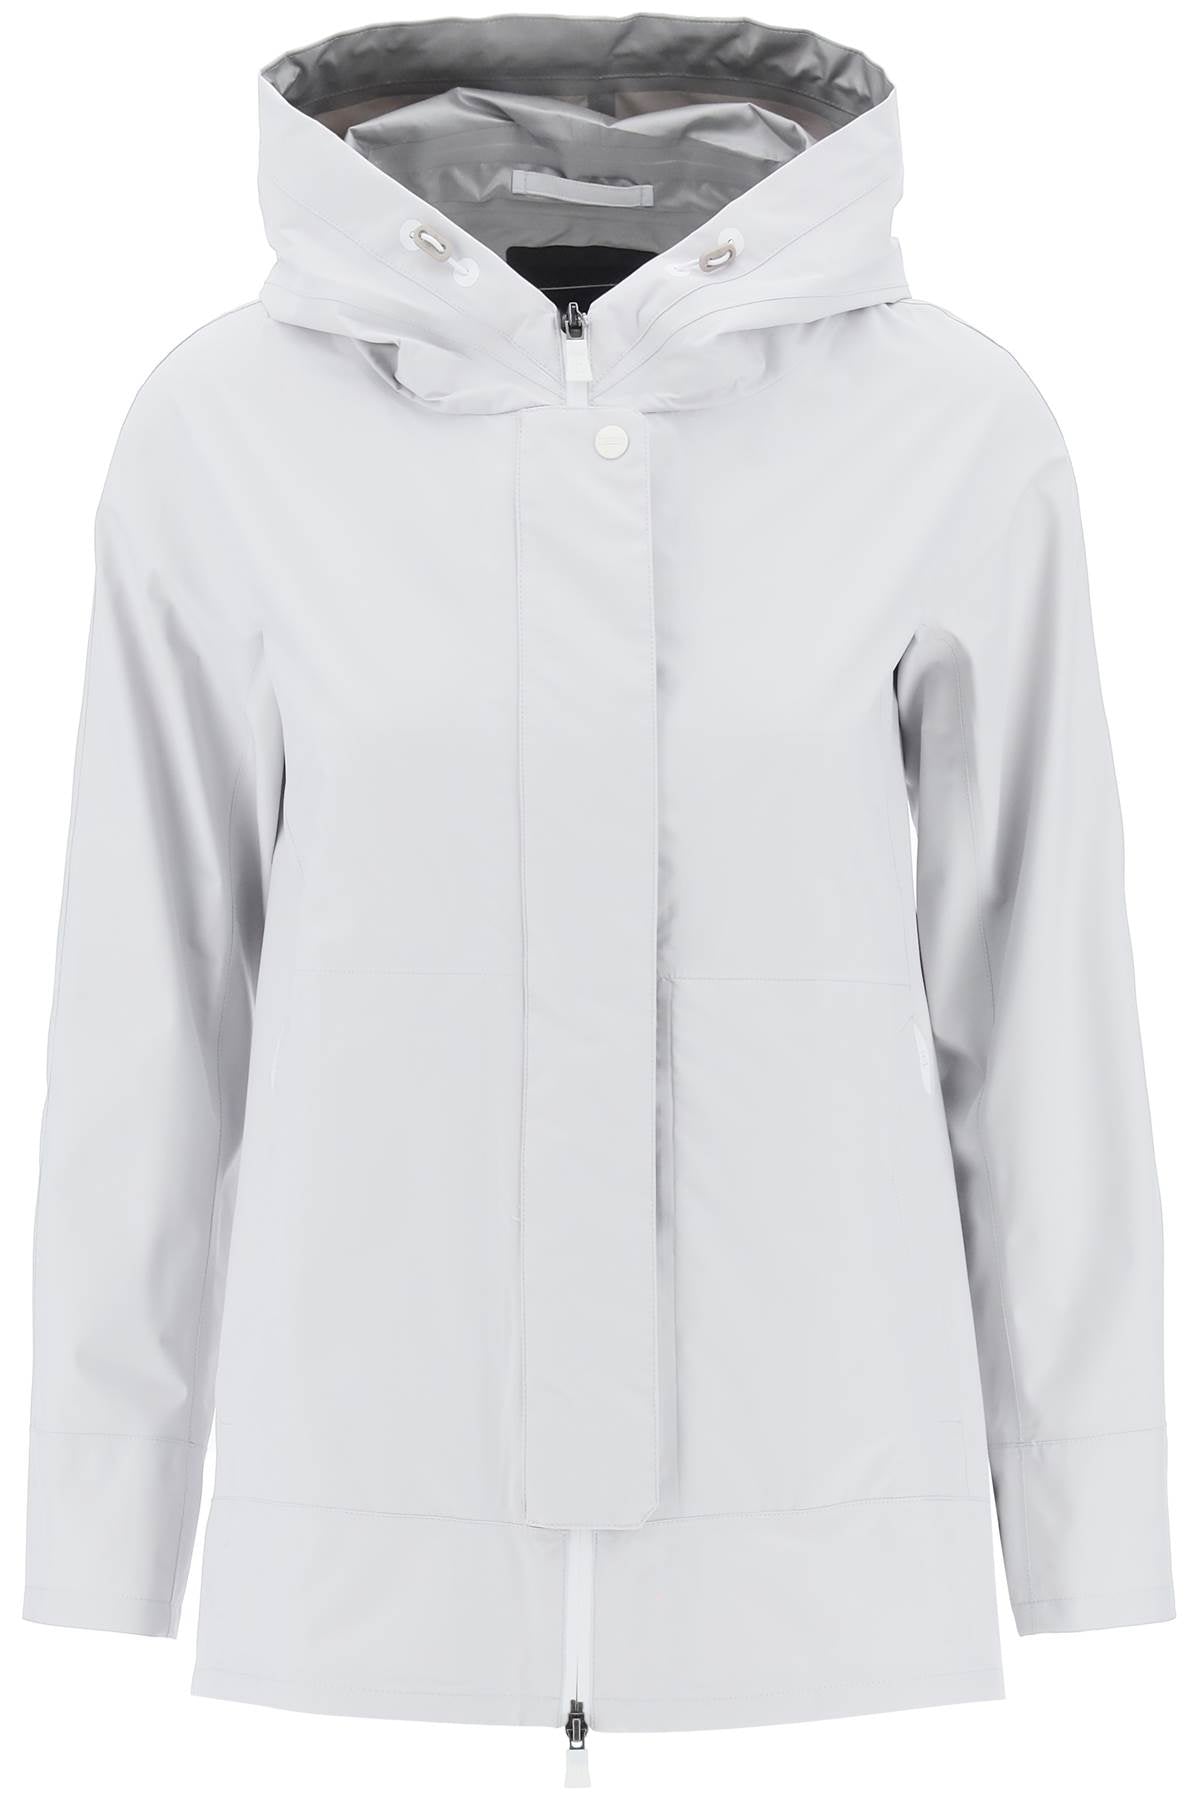 HERNO Multicolor Lightweight A-Line Gore-Tex Jacket for Women